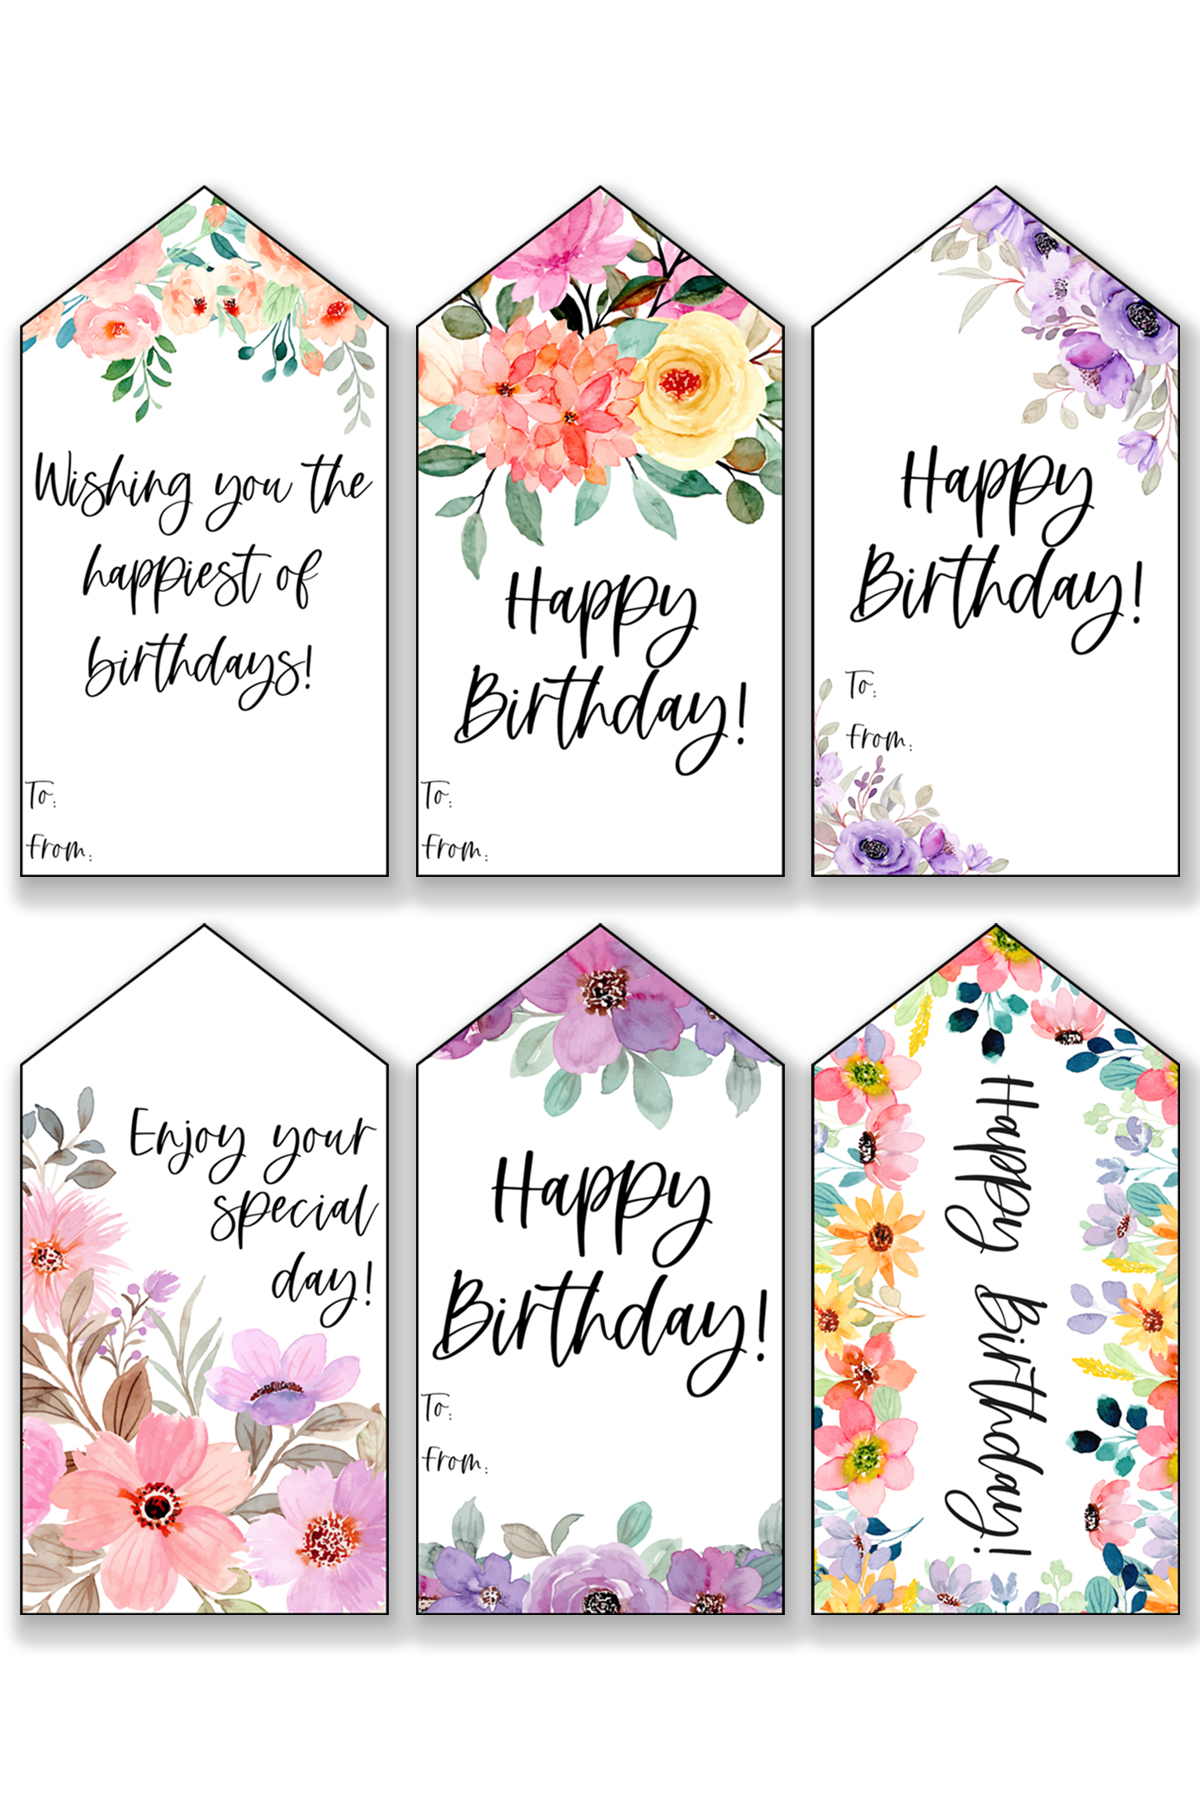 This image is showing one of the free printable birthday tags set - each tag has watercolor flowers in various shades of color.